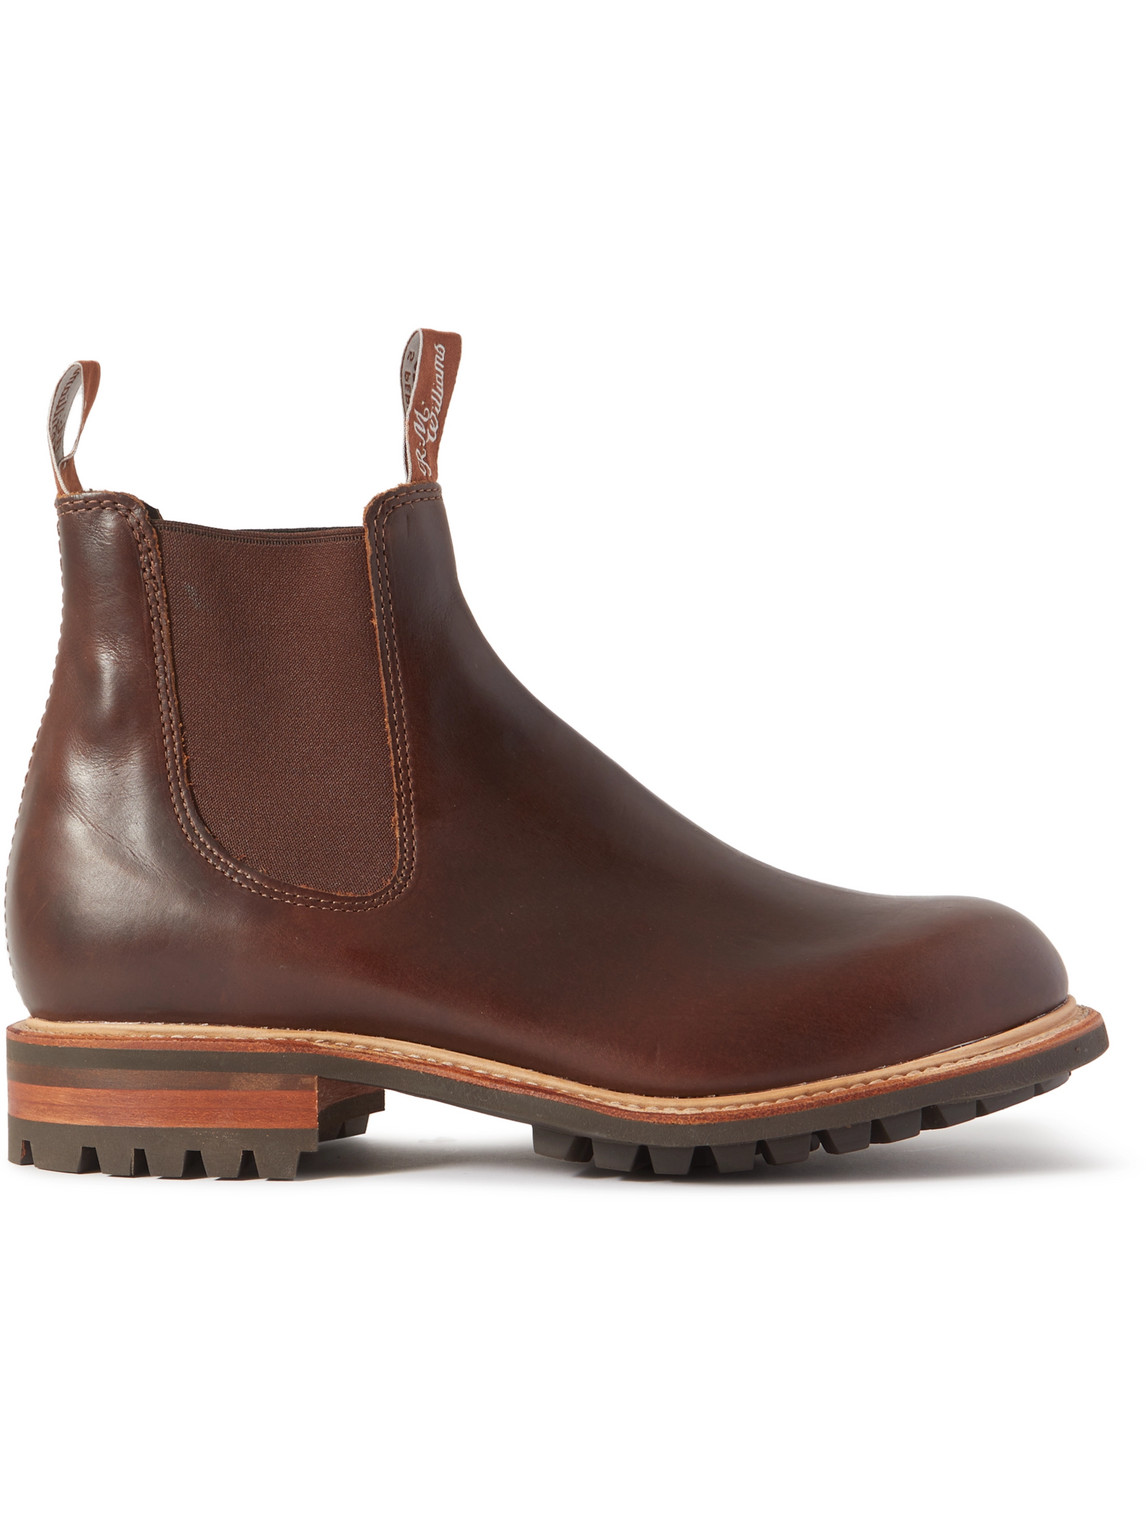 Steal Alert: 30% off R.M. Williams Chelsea Boots